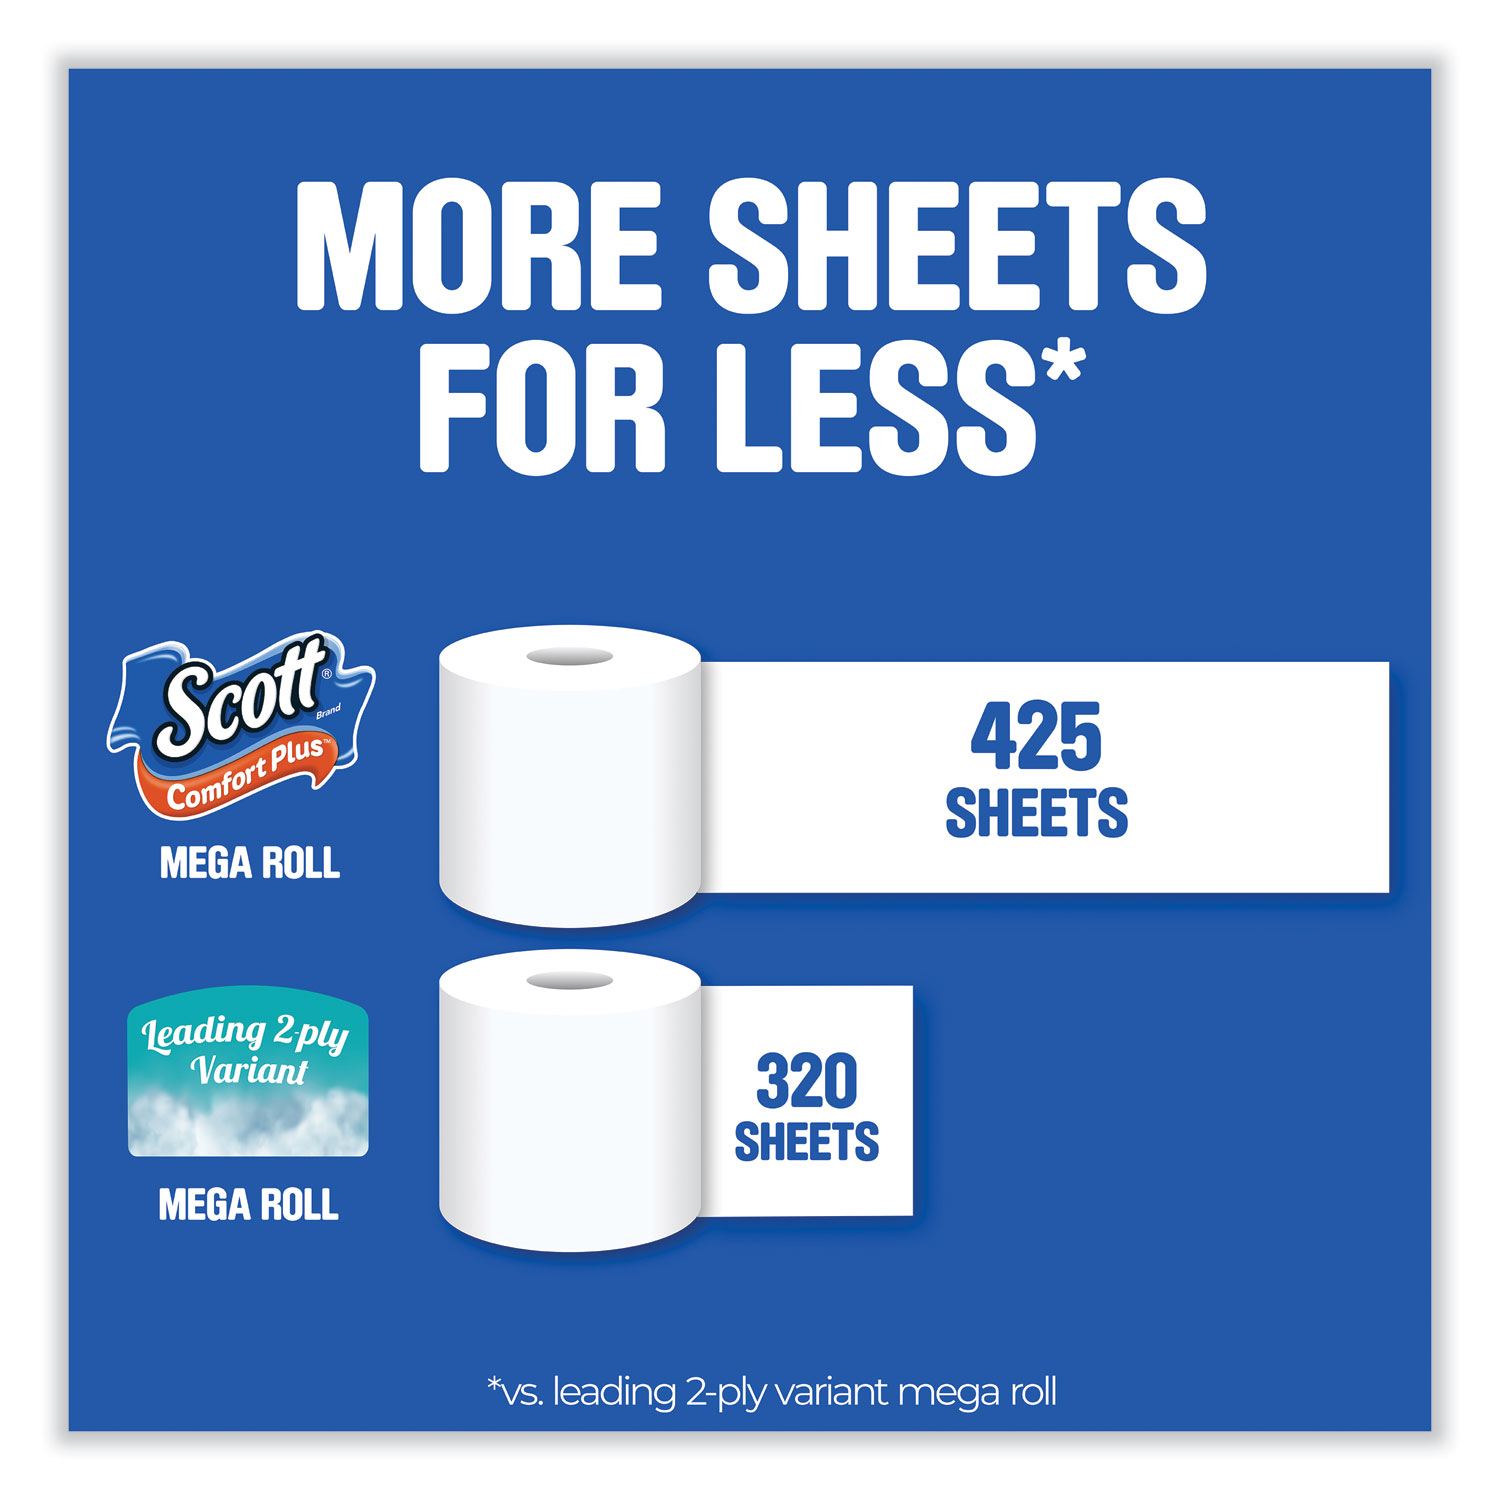 Scott ComfortPlus with Thick and Plush Toilet Paper , Designed to Care For  You With Everyday Comfort, 12 Pack 